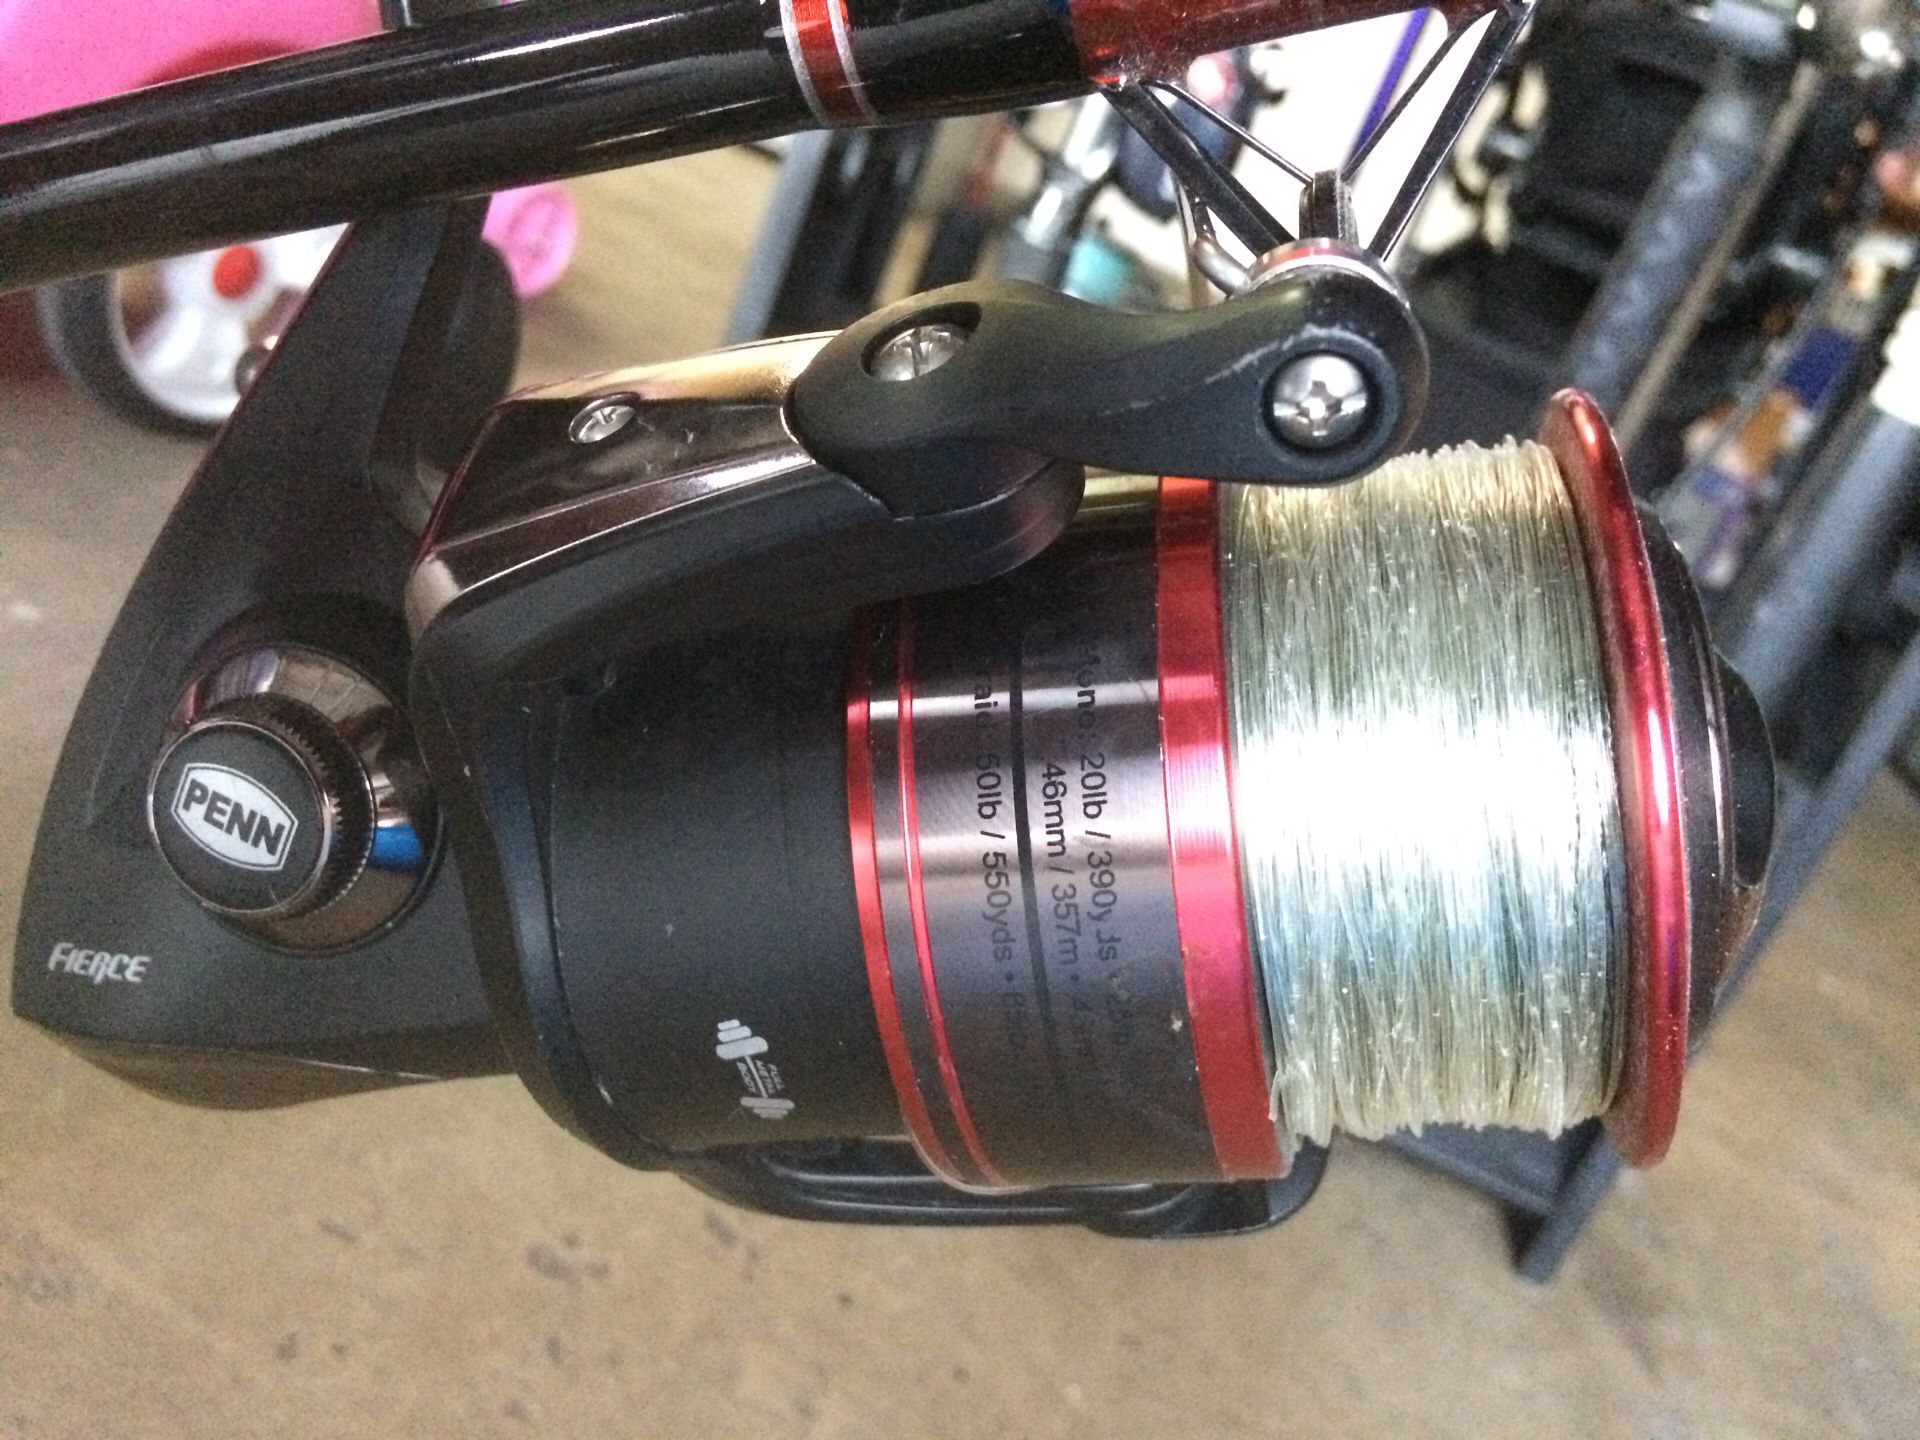 Penn Fierce Reel with 12ft Master Power 6000 Pole for Sale in San Diego, CA  - OfferUp